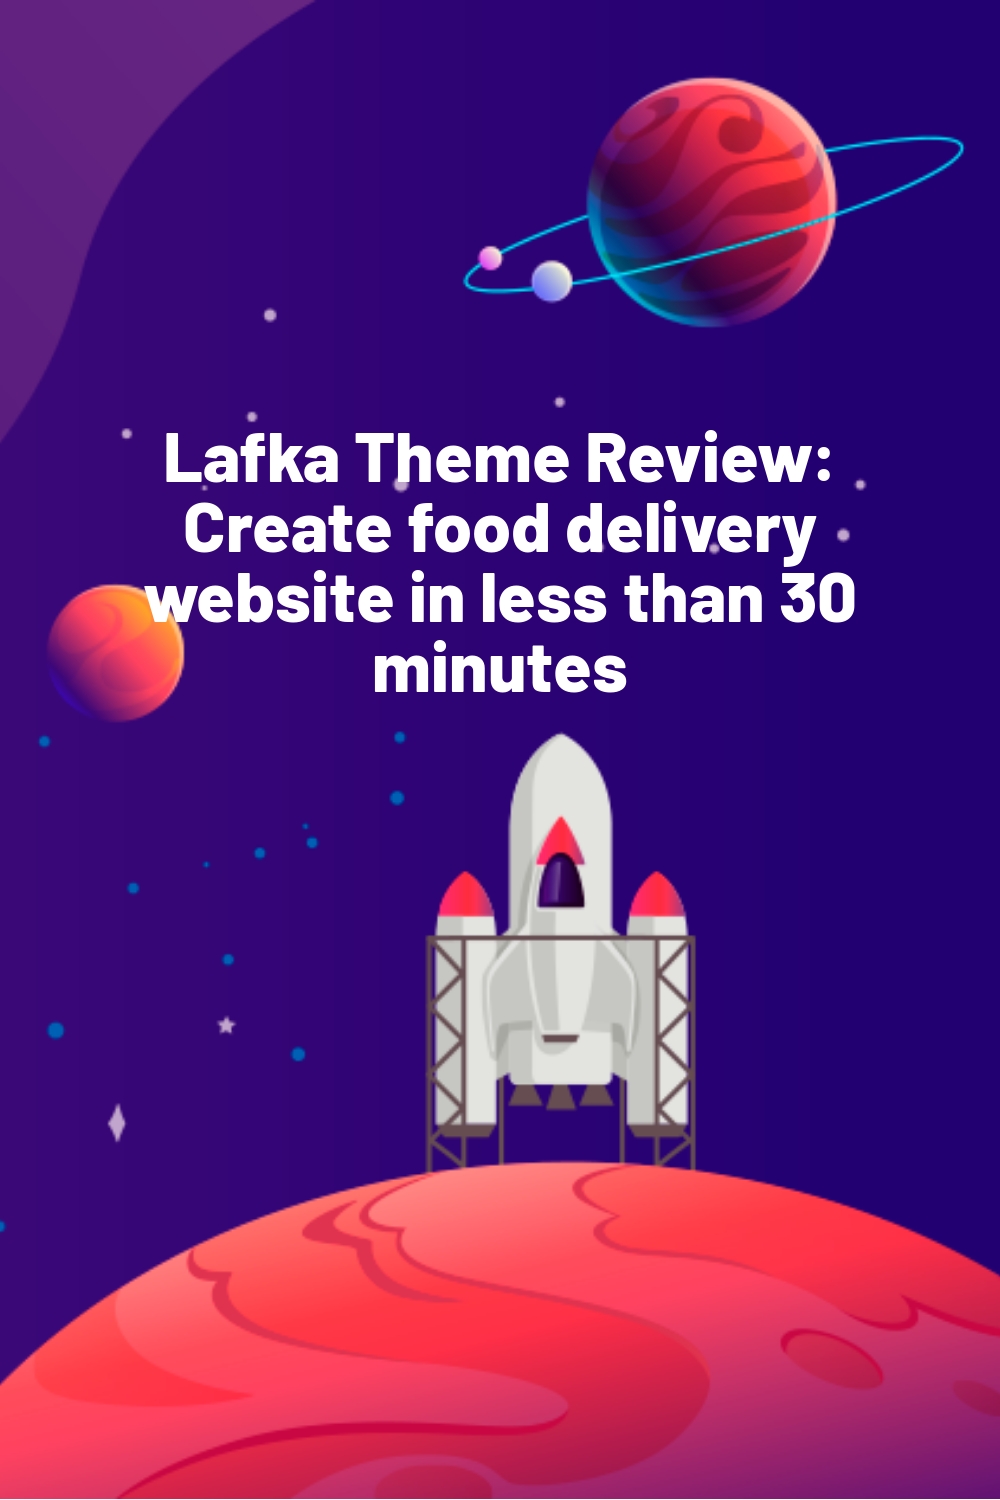 Lafka Theme Review: Create food delivery website in less than 30 minutes